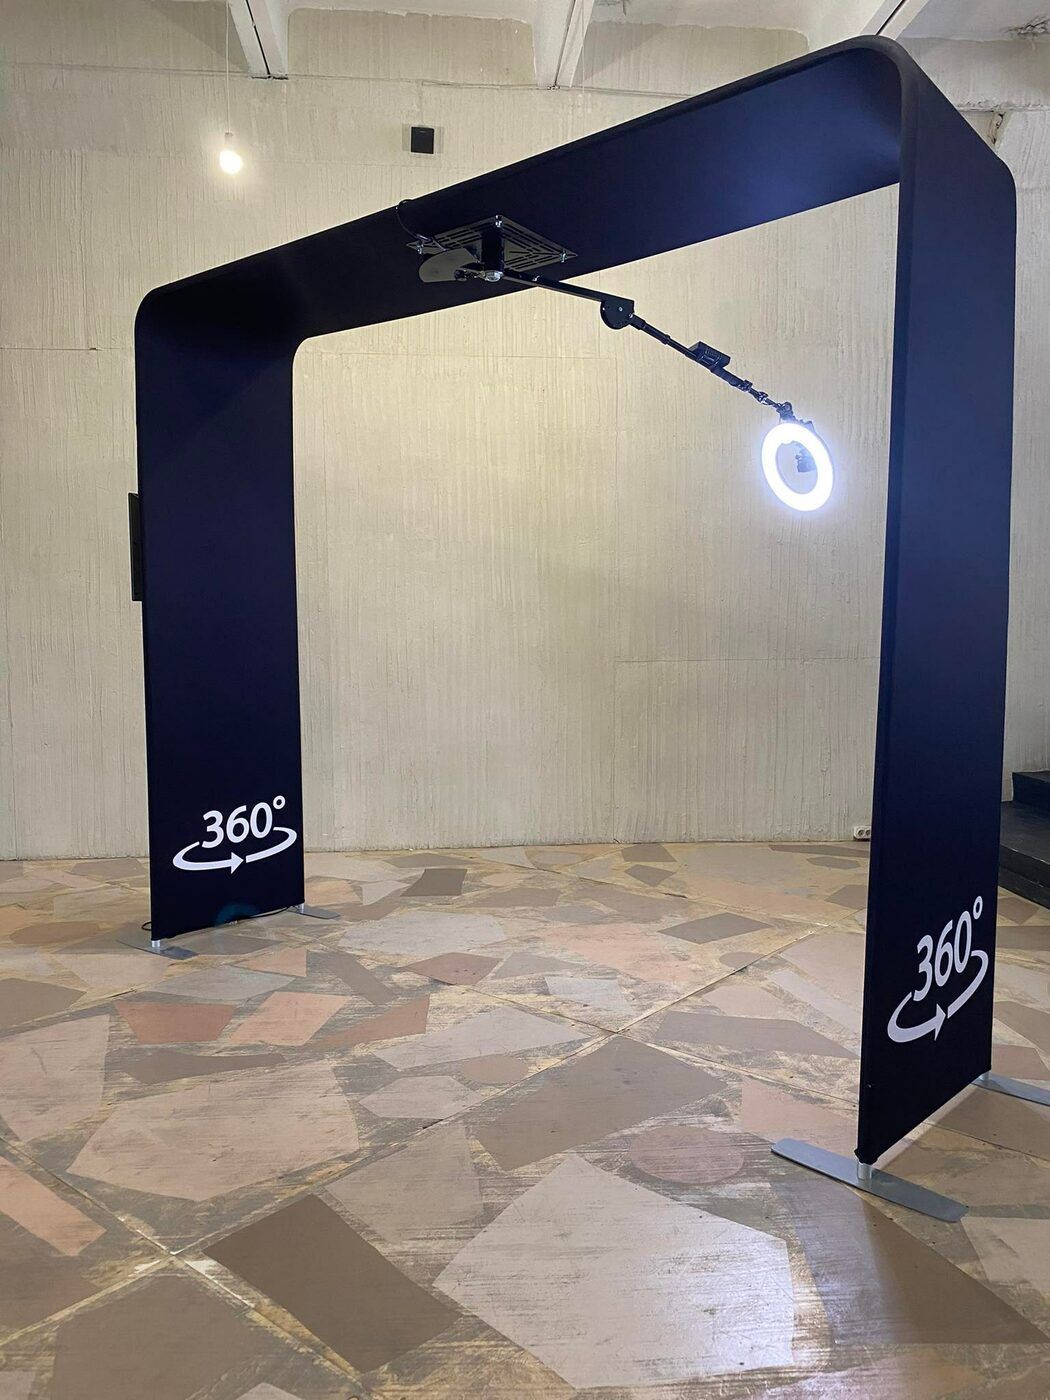 A 360 photo booth during an event in Little Rock, AR